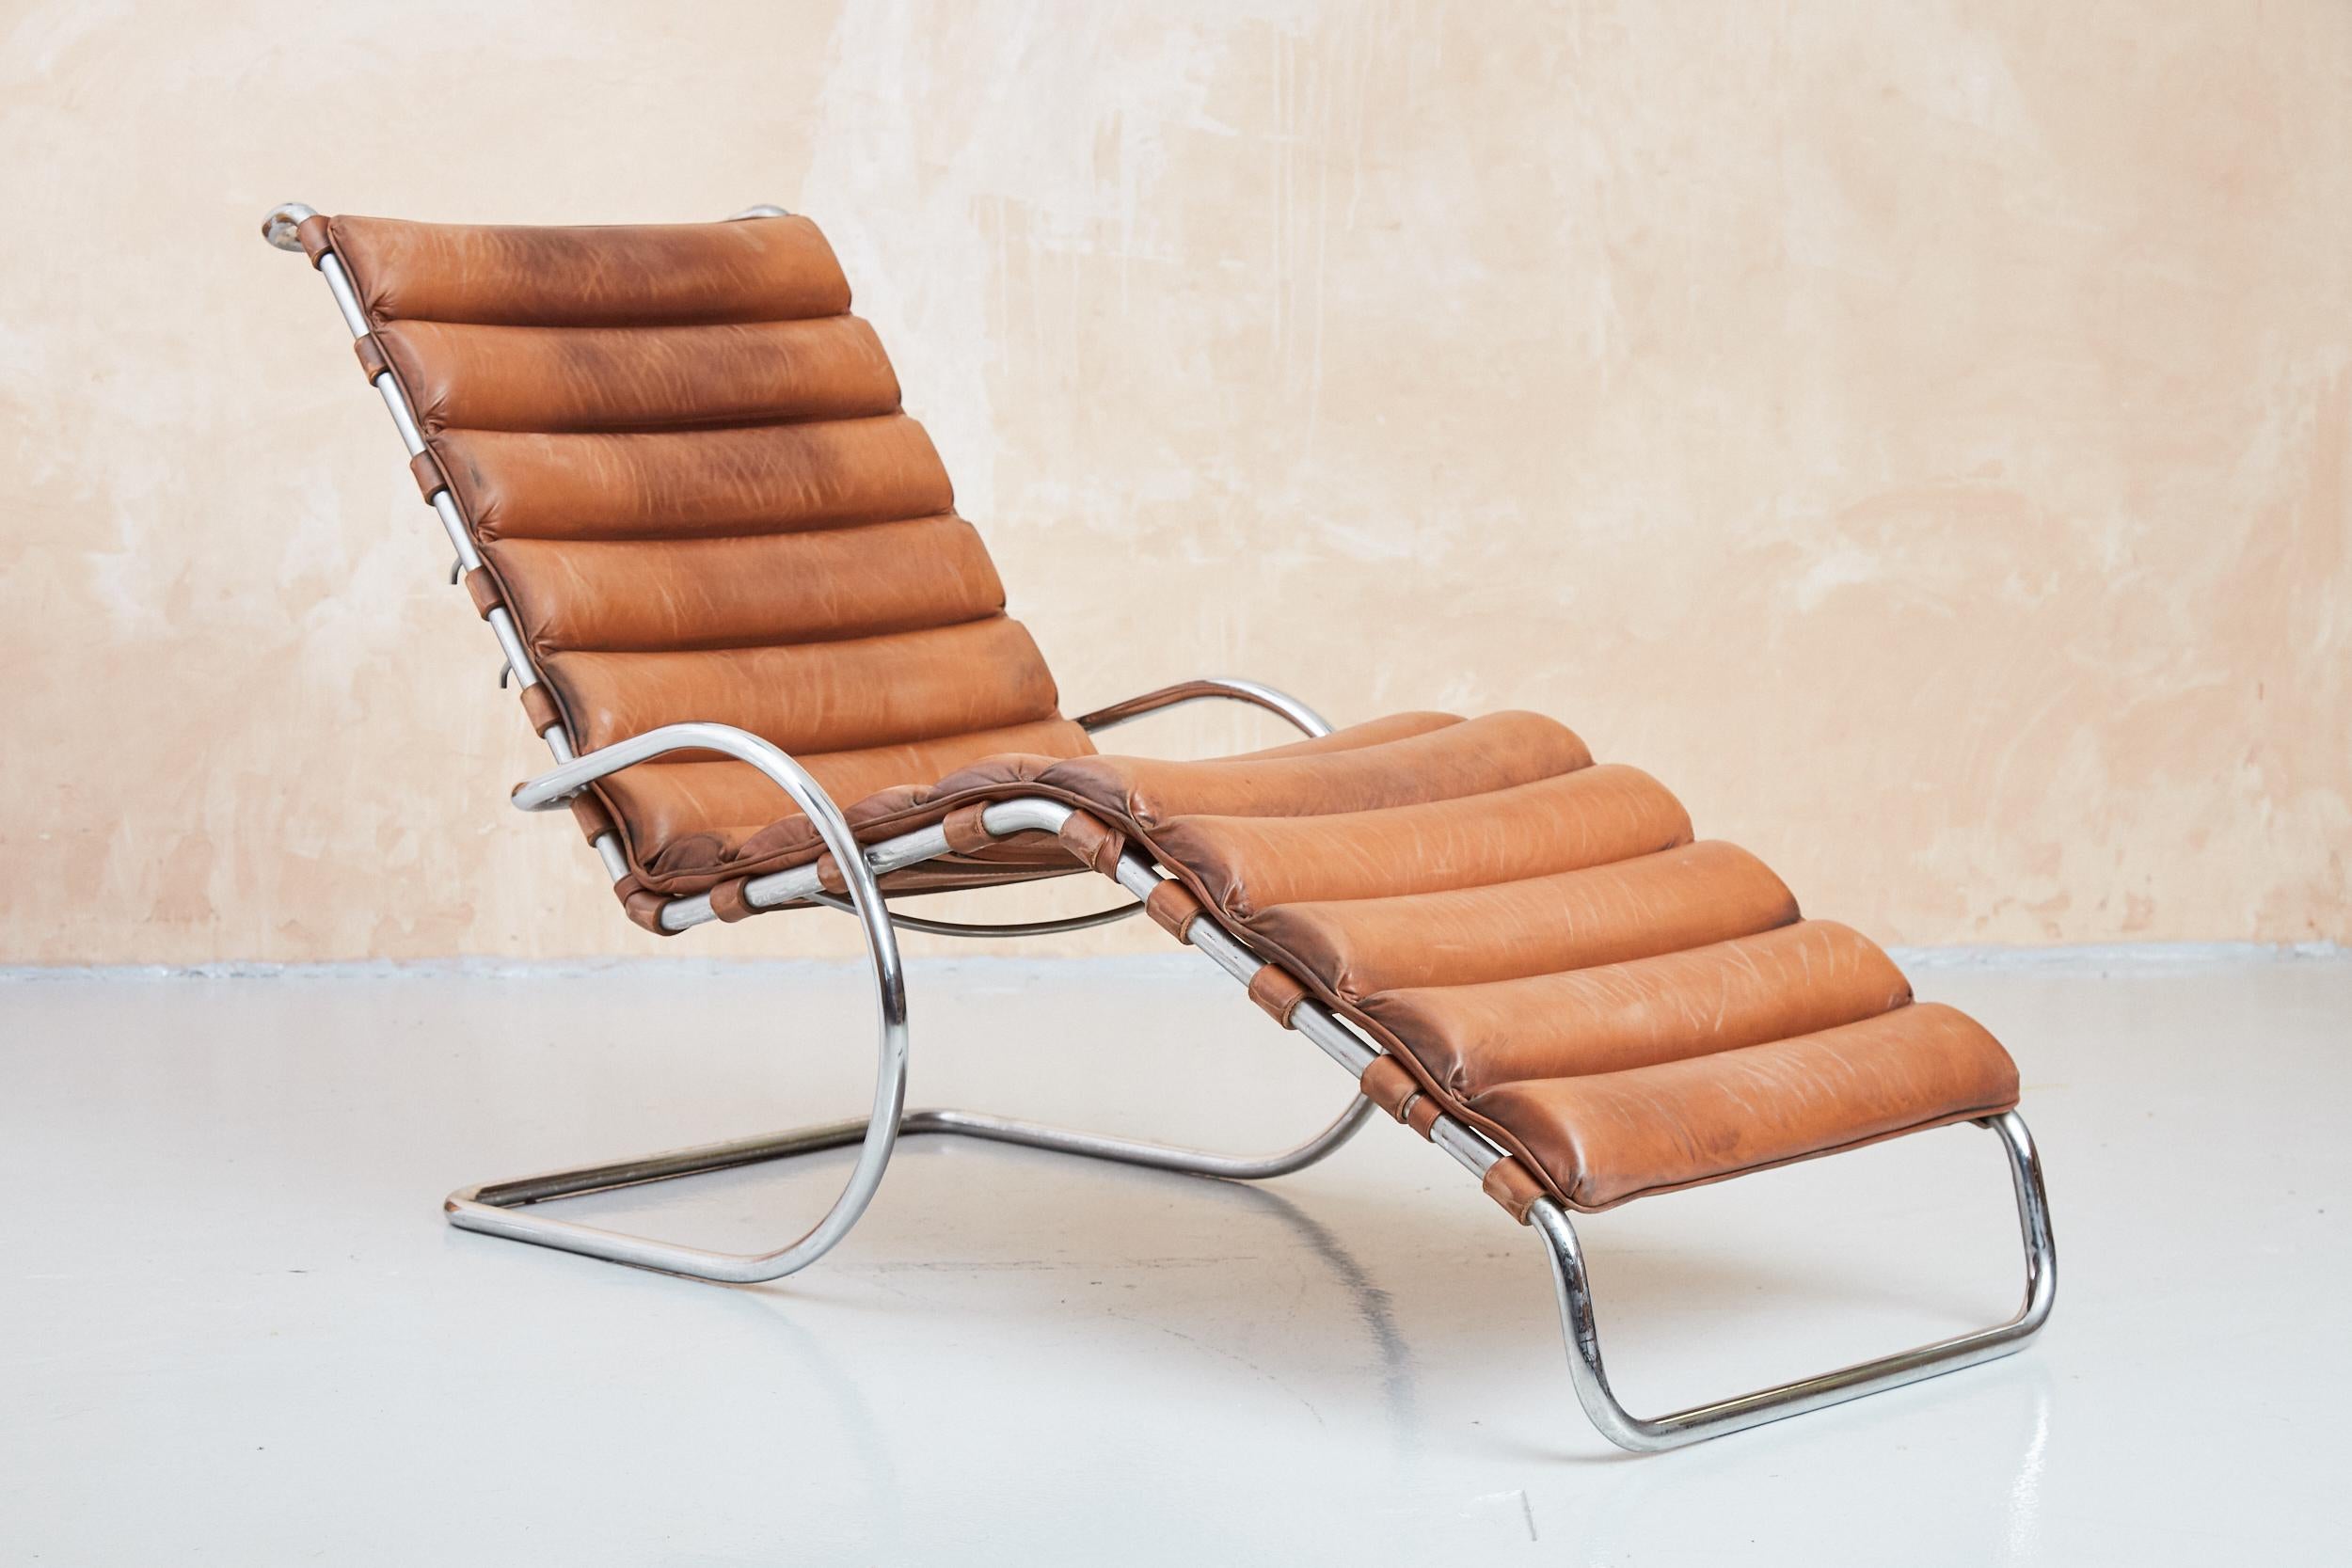 The adjustable Model 242 MR Chaise Lounge was designed by Ludwig Mies van der Rohe in 1927.
Produced in 1980 by Knoll International in the USA, with Brown leather and a chrome steel frame.
This Chaise Longue was designed by Mies van der Rohe in 1927